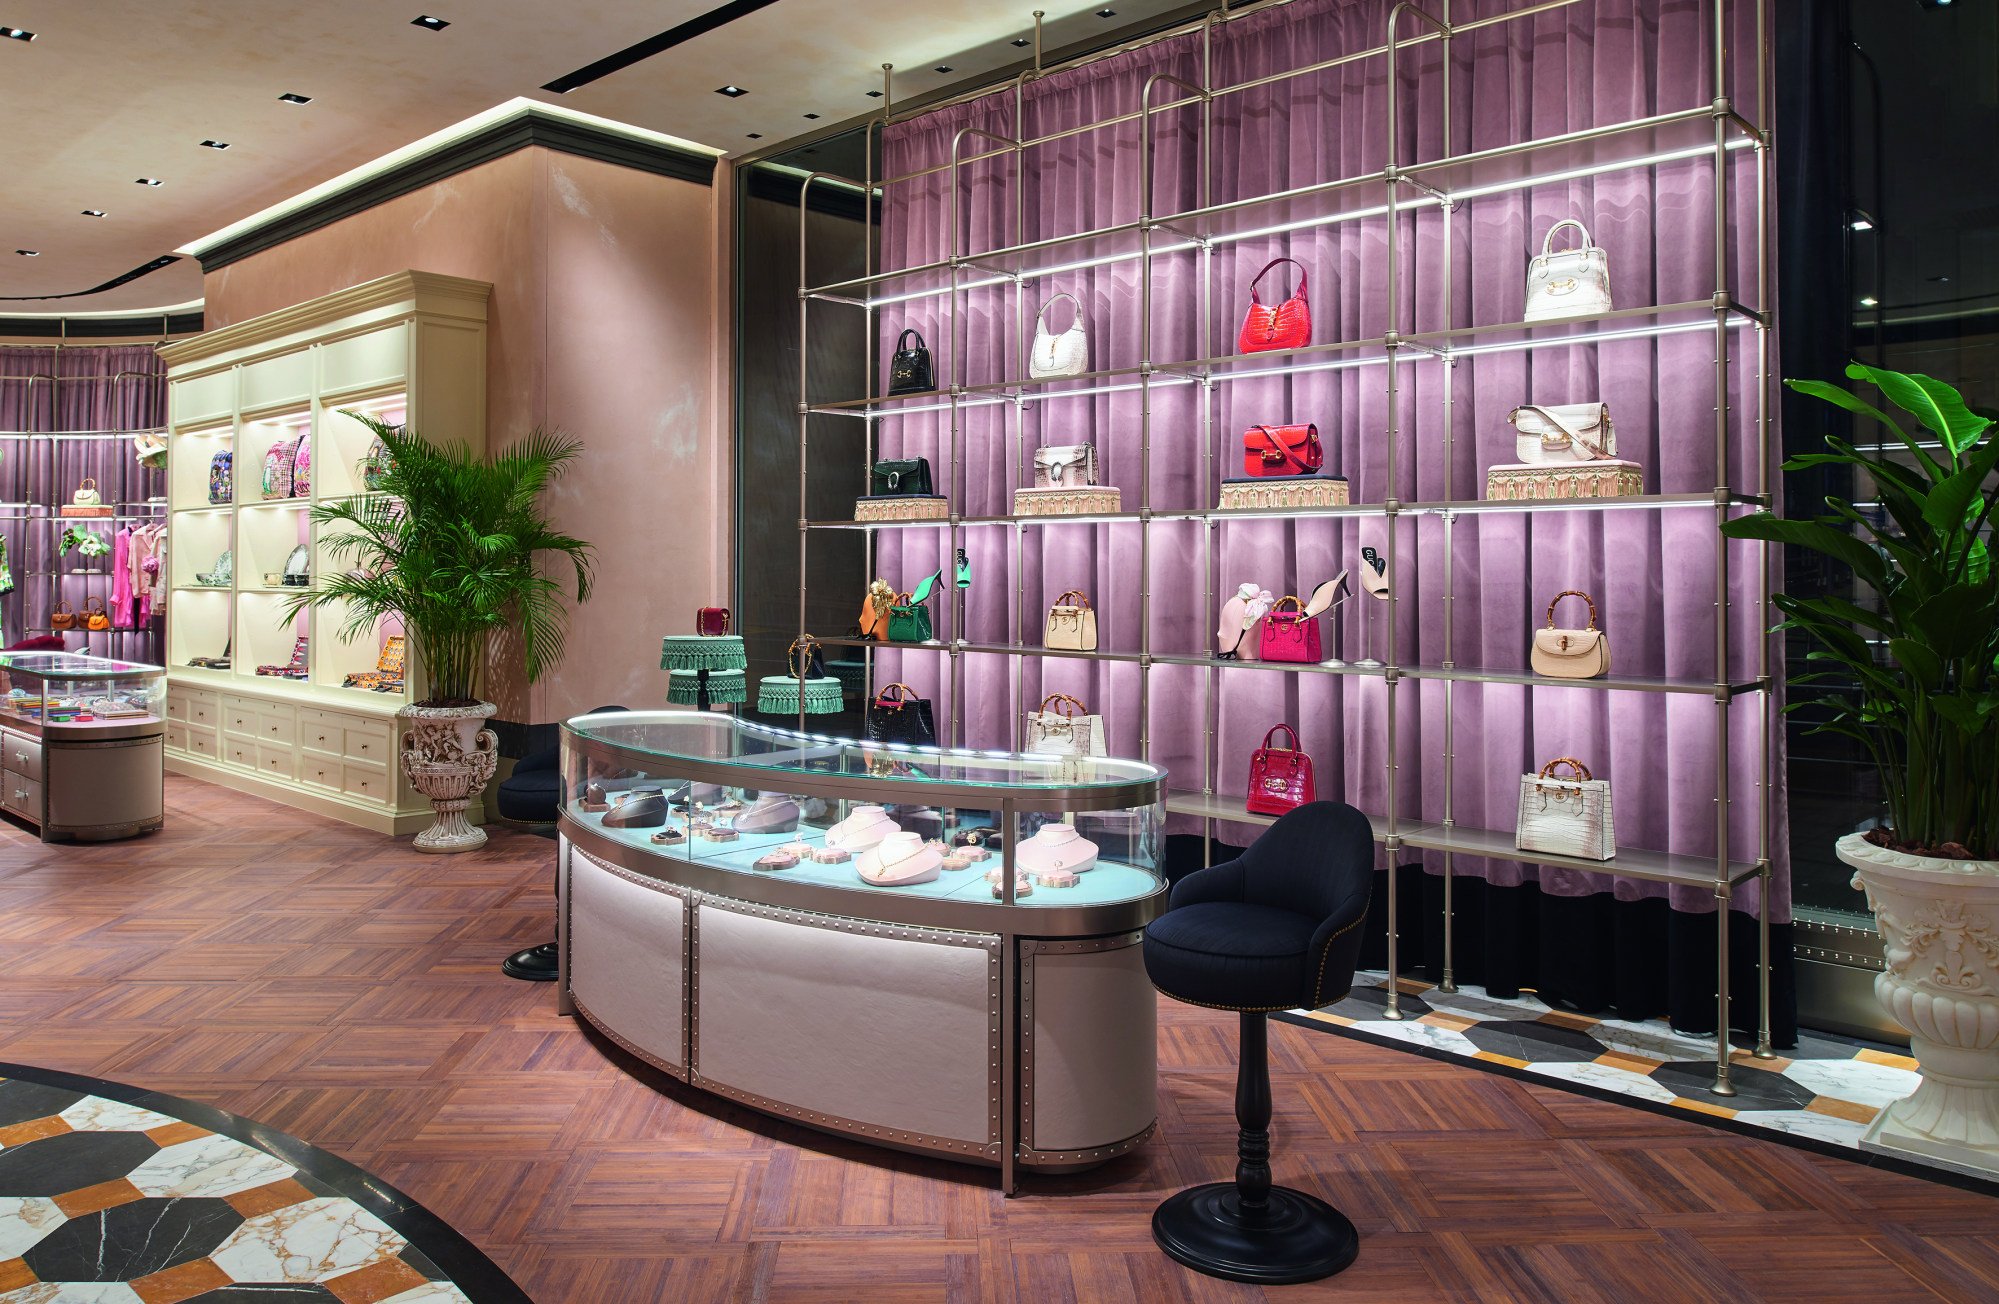 Gucci Collection of designer and luxury clothing - VITKAC Hong Kong